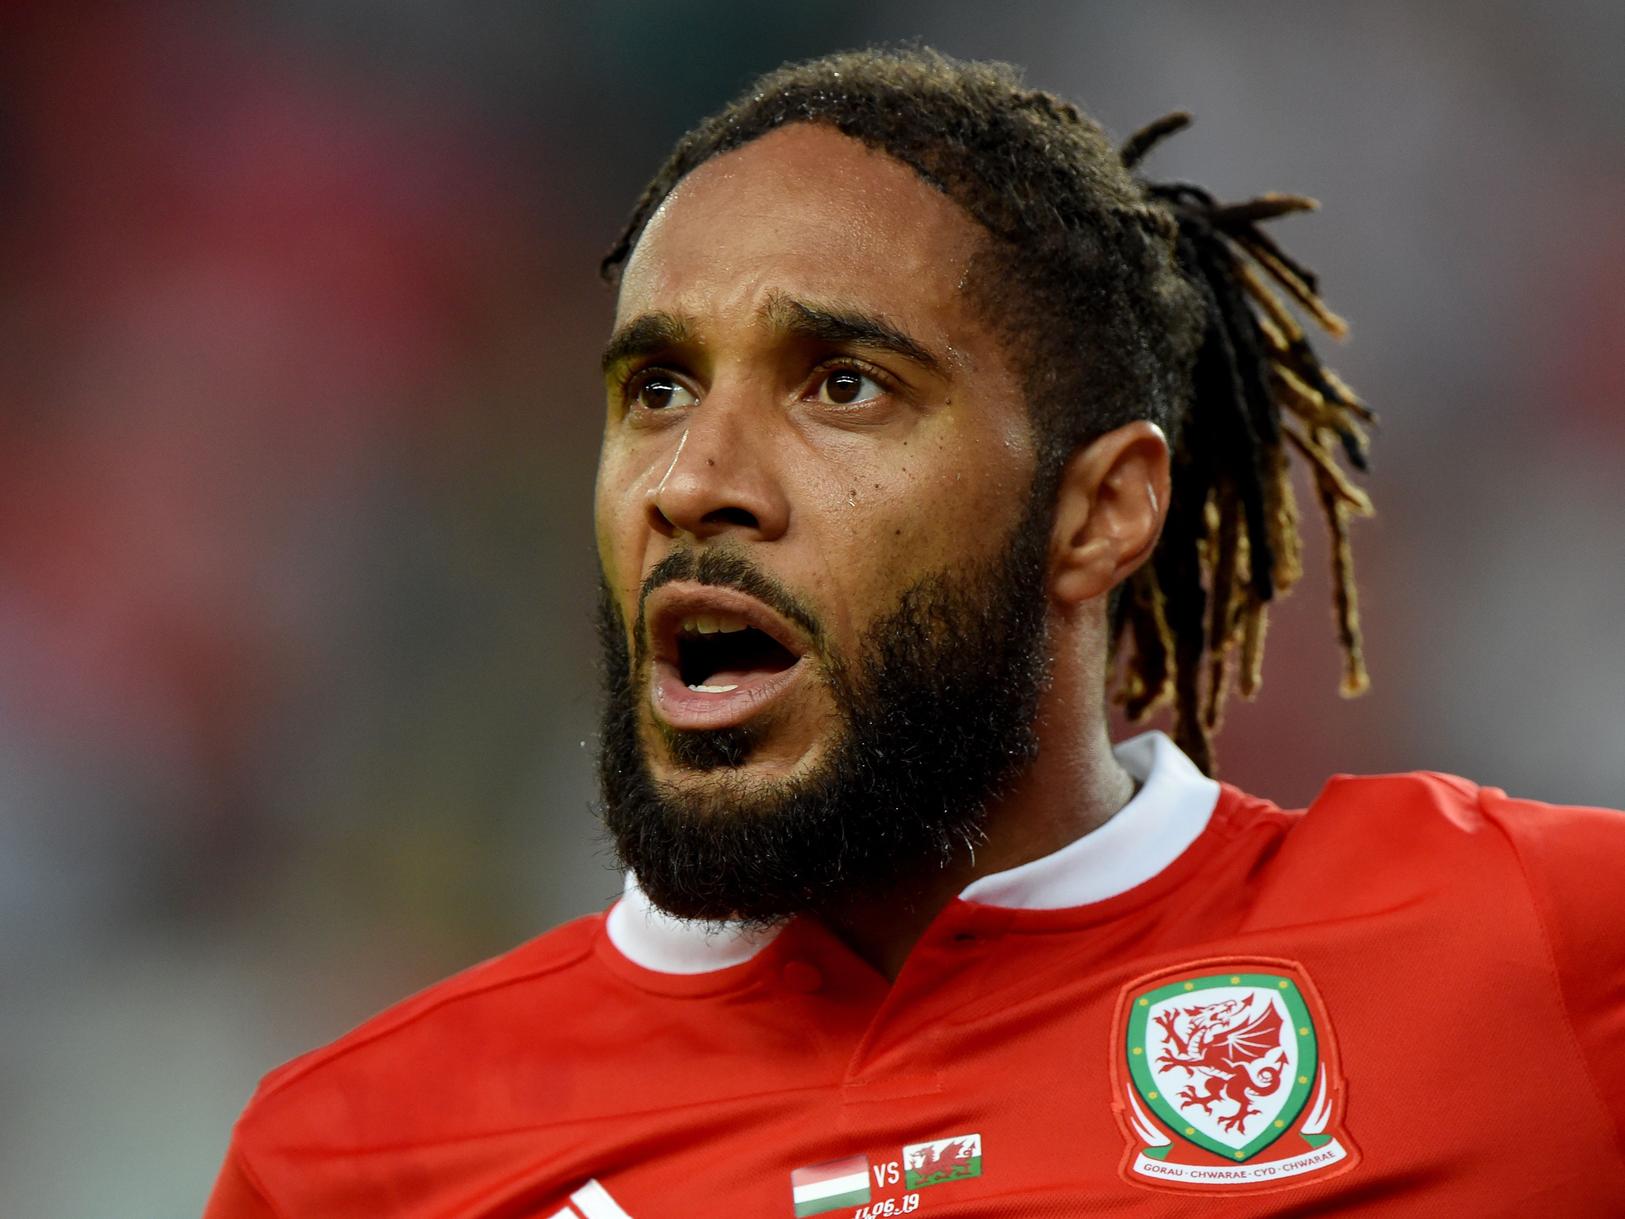 Belgian side Anderlecht are rumoured to be plotting a move for Bristol City defender Ashley Williams, as the player's short-term contract with the Robins expires in January. (The 72)